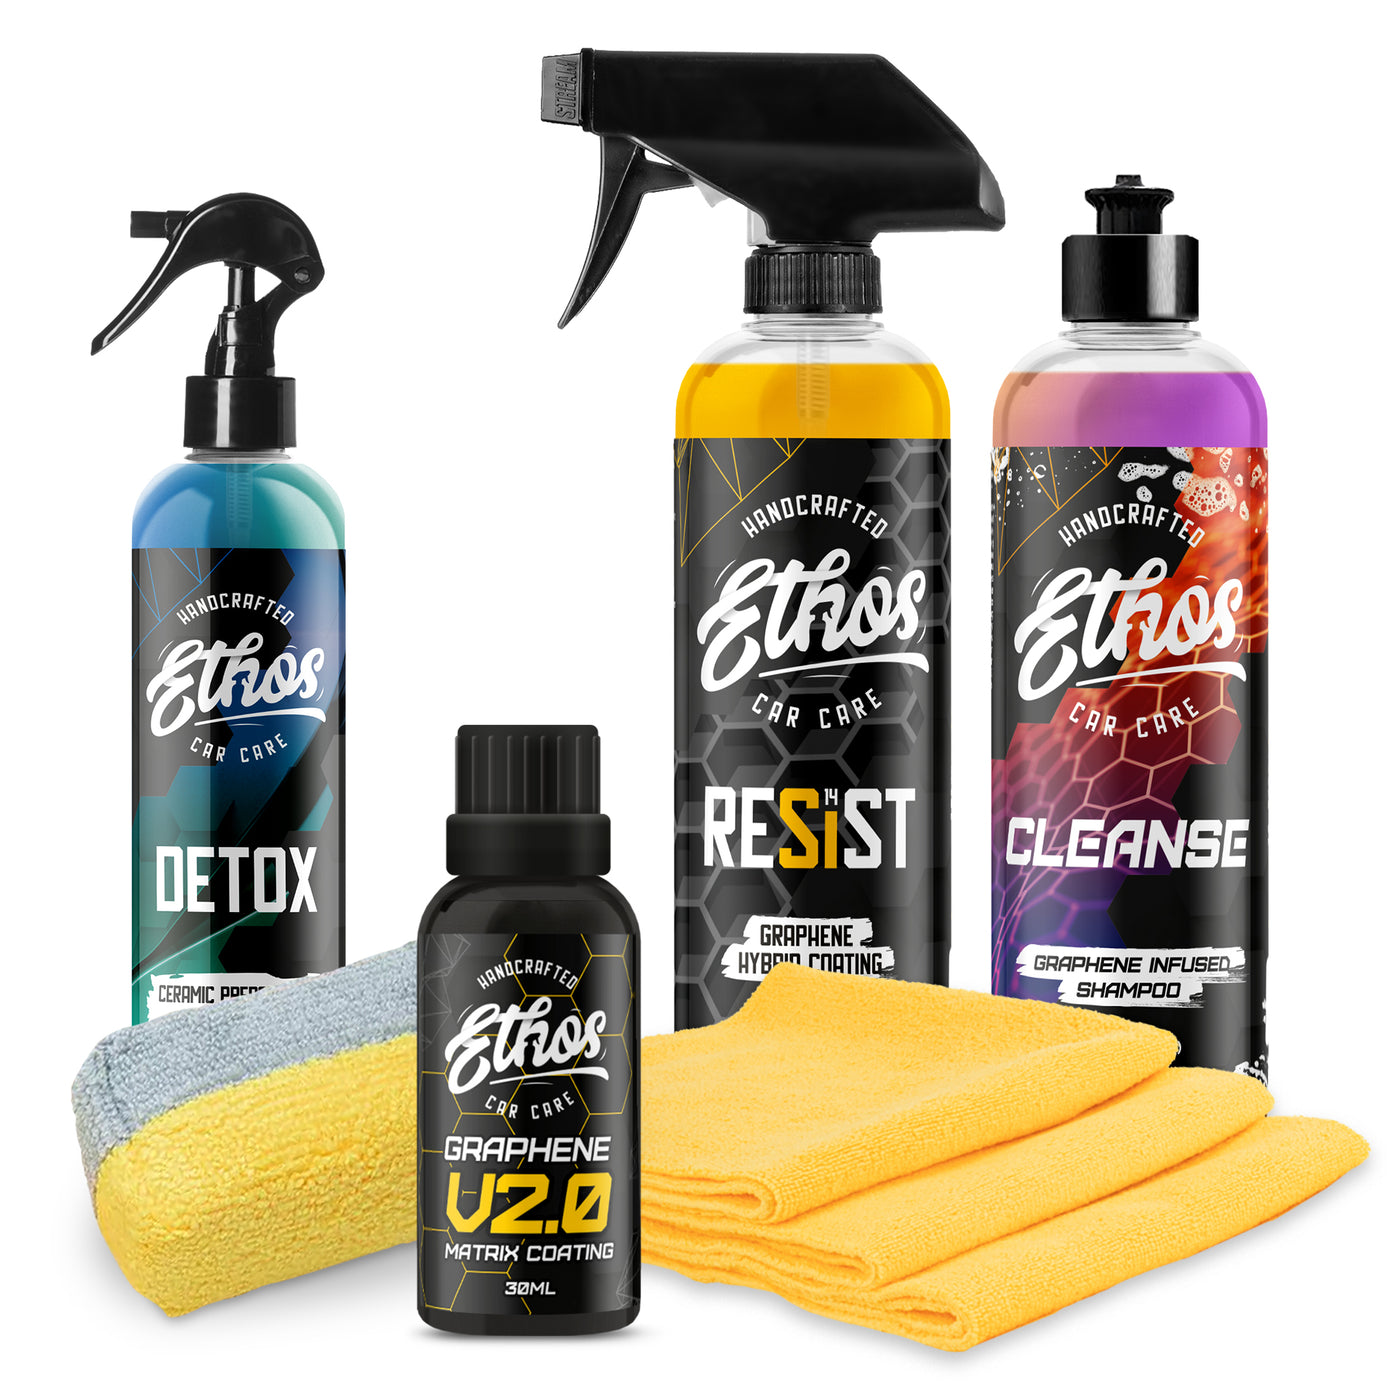  Ethos Interior Detailer - Easily Cleans and Protects All  Interior Surfaces, Non Greasy Satin Finish with UV Protection and Odor  Neutralizing Agents for Interior Care